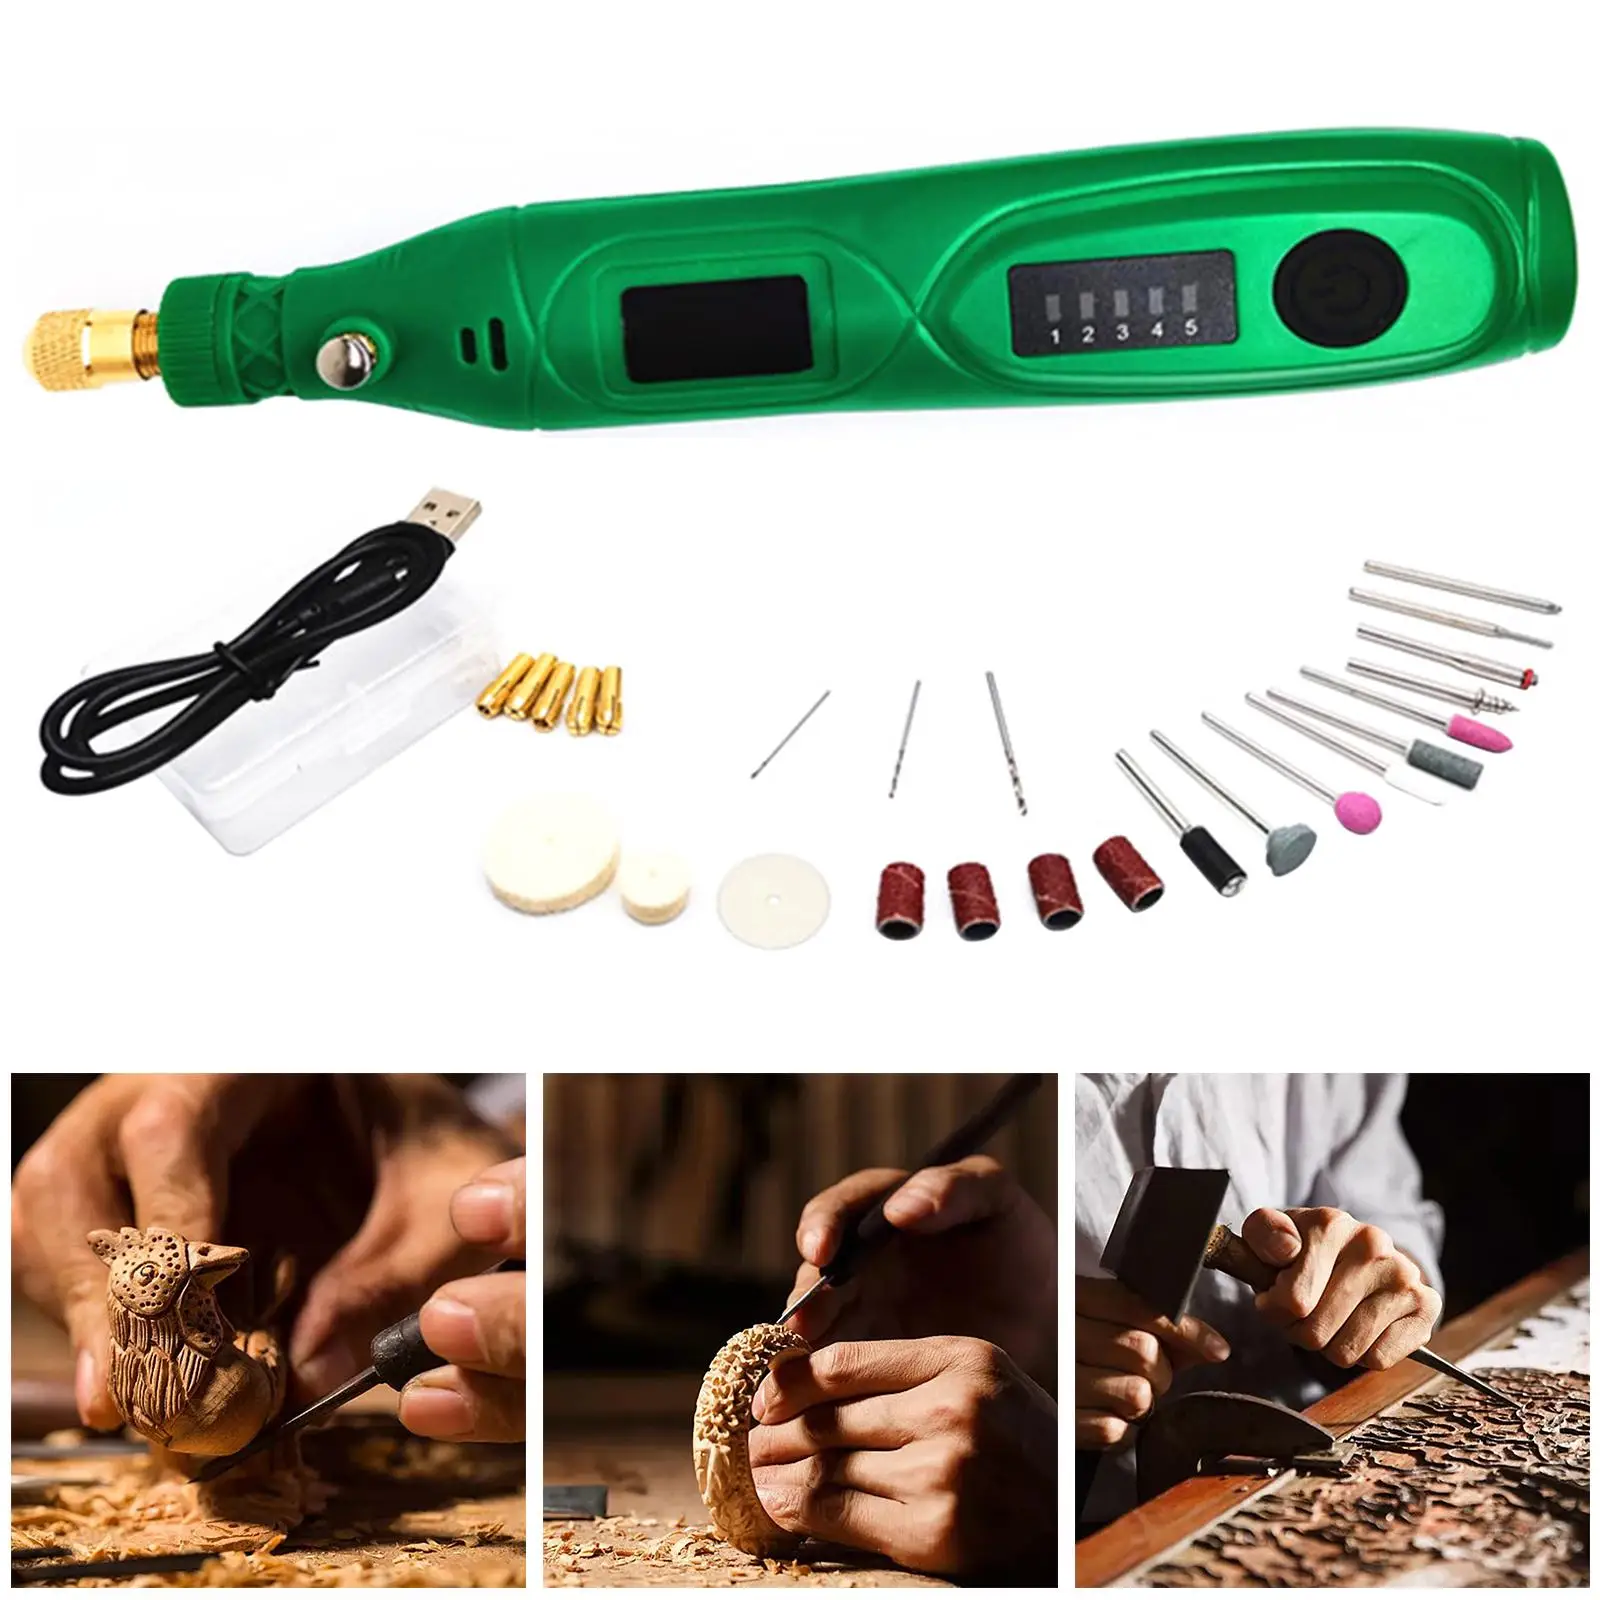 Electric Grinder Drill Bit Pen Jewellery Etching for Carving Cutting and Polishing